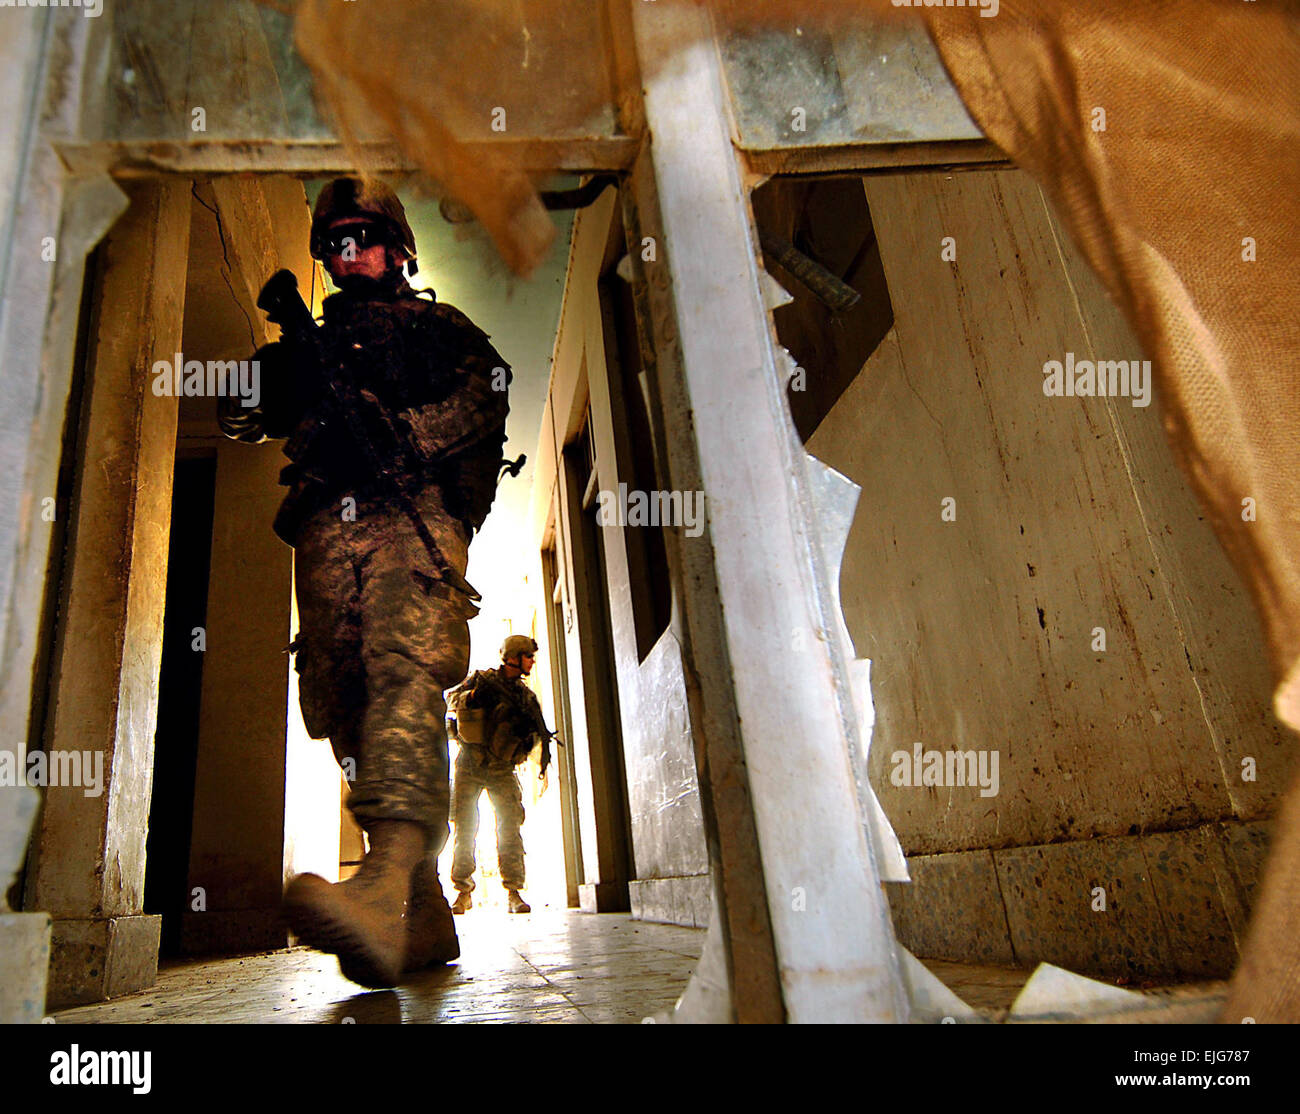 U.S. Army Soldiers search a house during a cordon and knock patrol in the northern section of Nineva in Mosul, Iraq, July 10, 2006. The Soldiers are from 4th Platoon, Charlie Company, 2nd Battalion, 1st Infantry Regiment, 172nd Stryker Brigade Combat Team based out of Fort Wainwright, Alaska.  Tech. Sgt. Jeremy T. Lock.      . Stock Photo